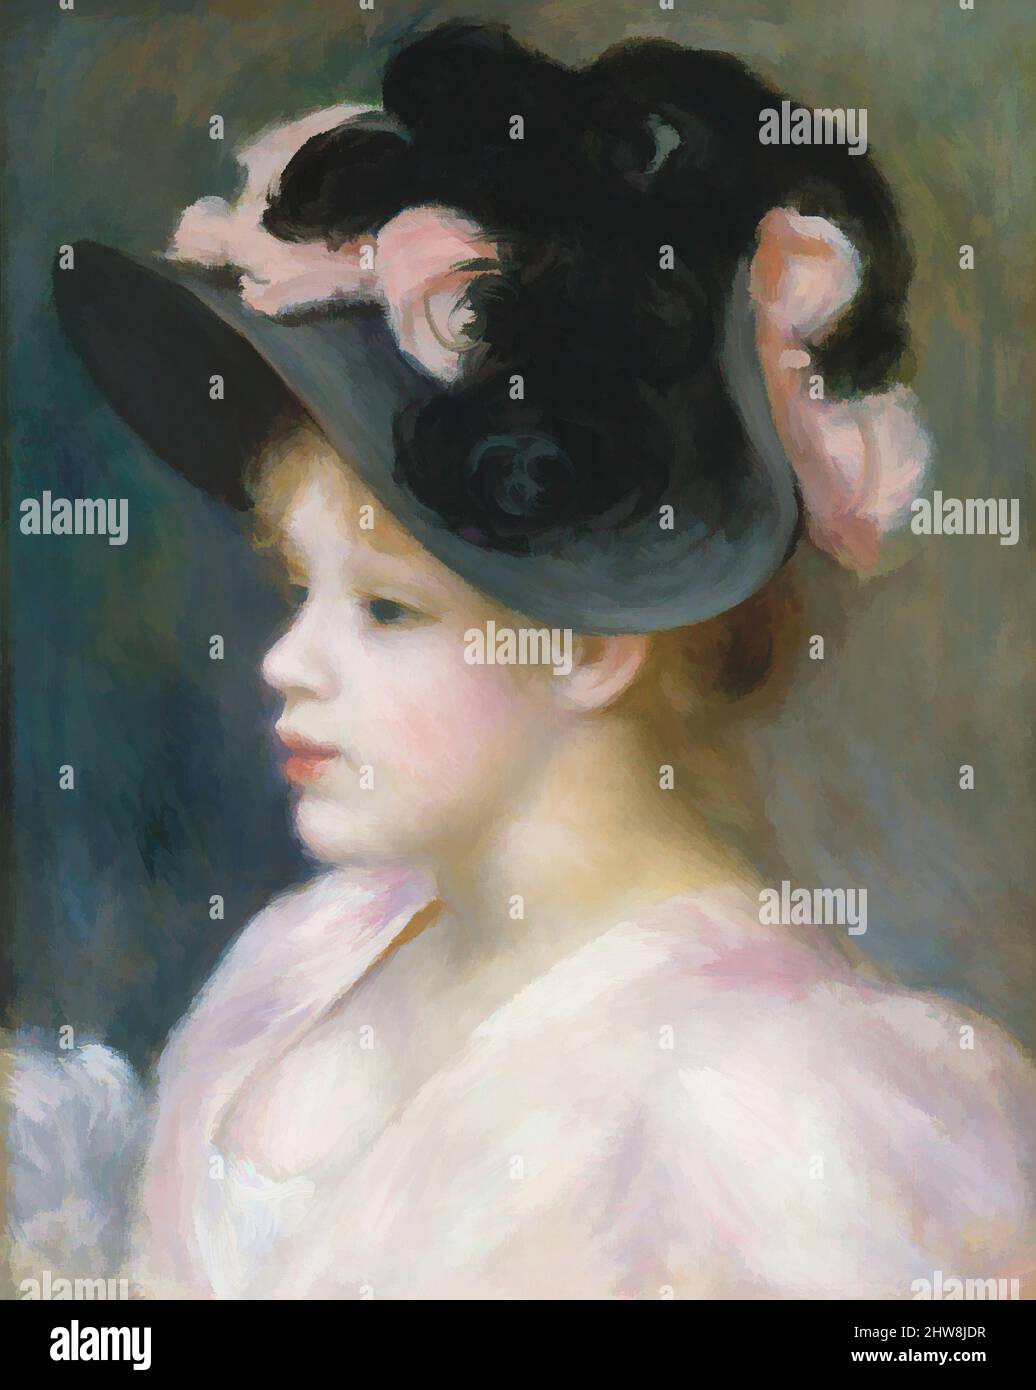 Art inspired by Young Girl in a Pink-and-Black Hat, ca. 1891, Oil on canvas, 16 x 12 3/4 in. (40.6 x 32.4 cm), Paintings, Auguste Renoir (French, Limoges 1841–1919 Cagnes-sur-Mer), This is one of many paintings that Renoir made in the 1890s of stylish young women in modish hats. He, Classic works modernized by Artotop with a splash of modernity. Shapes, color and value, eye-catching visual impact on art. Emotions through freedom of artworks in a contemporary way. A timeless message pursuing a wildly creative new direction. Artists turning to the digital medium and creating the Artotop NFT Stock Photo